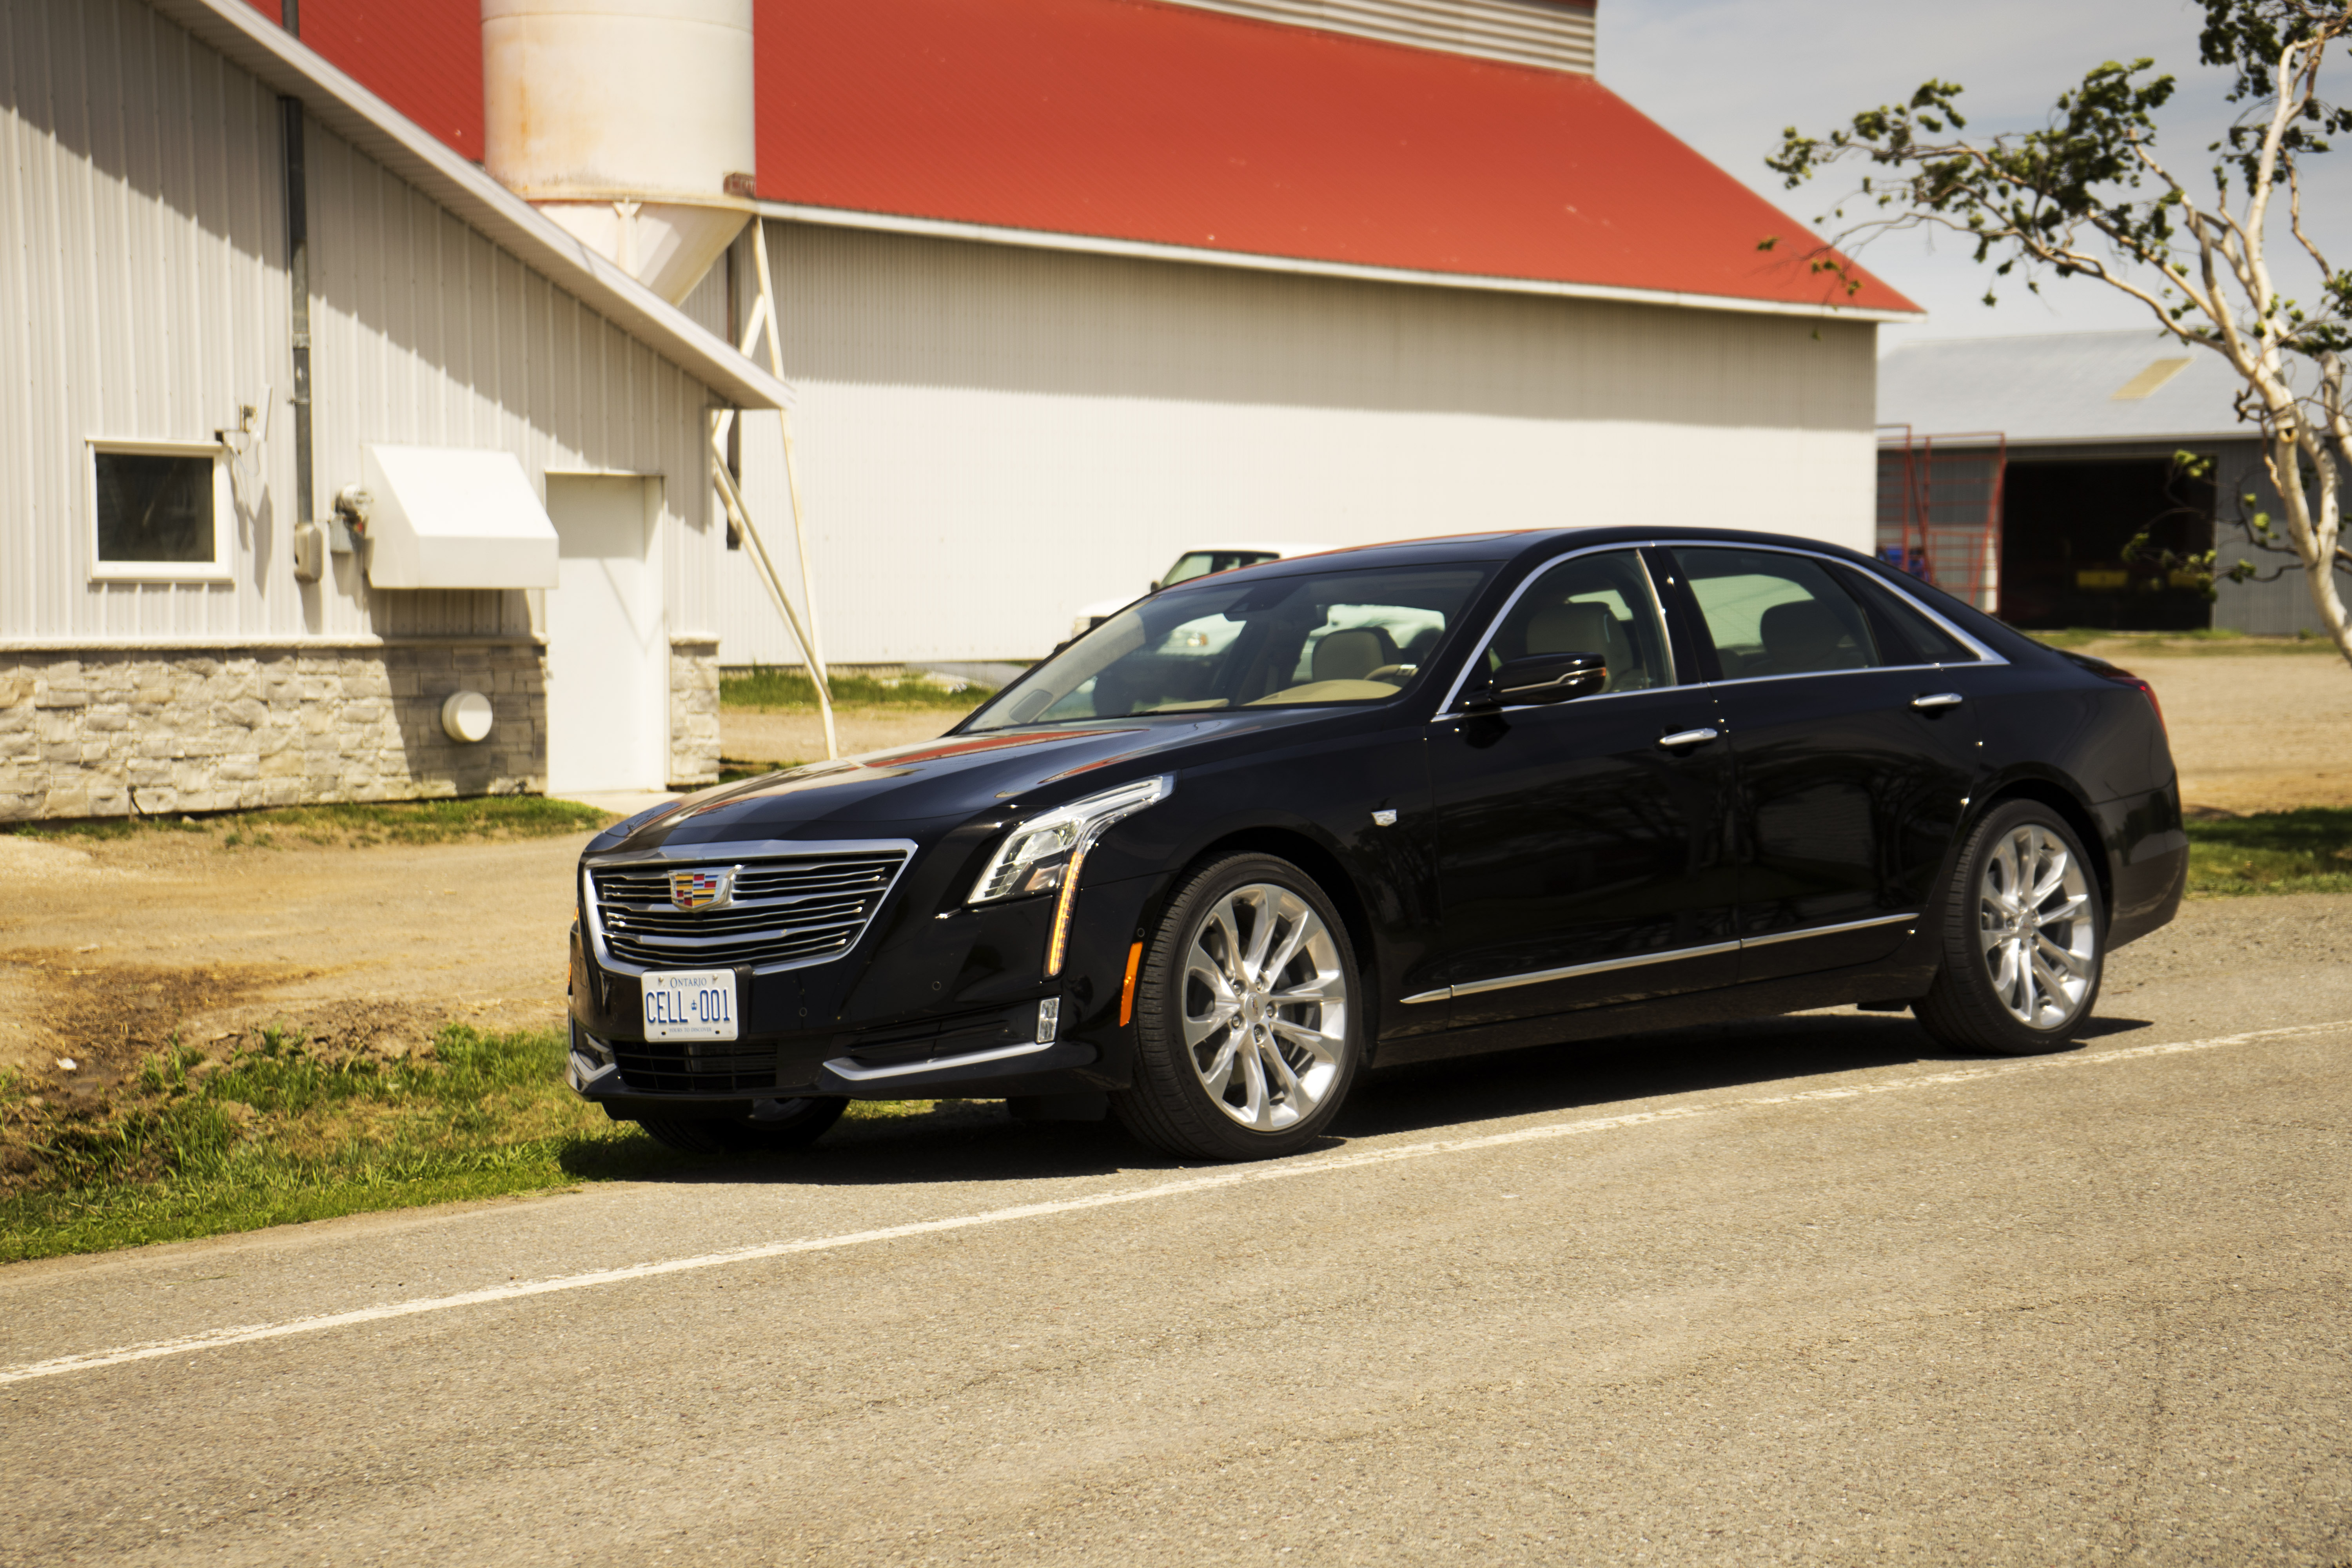 Cadillac CT6 exterior specifications